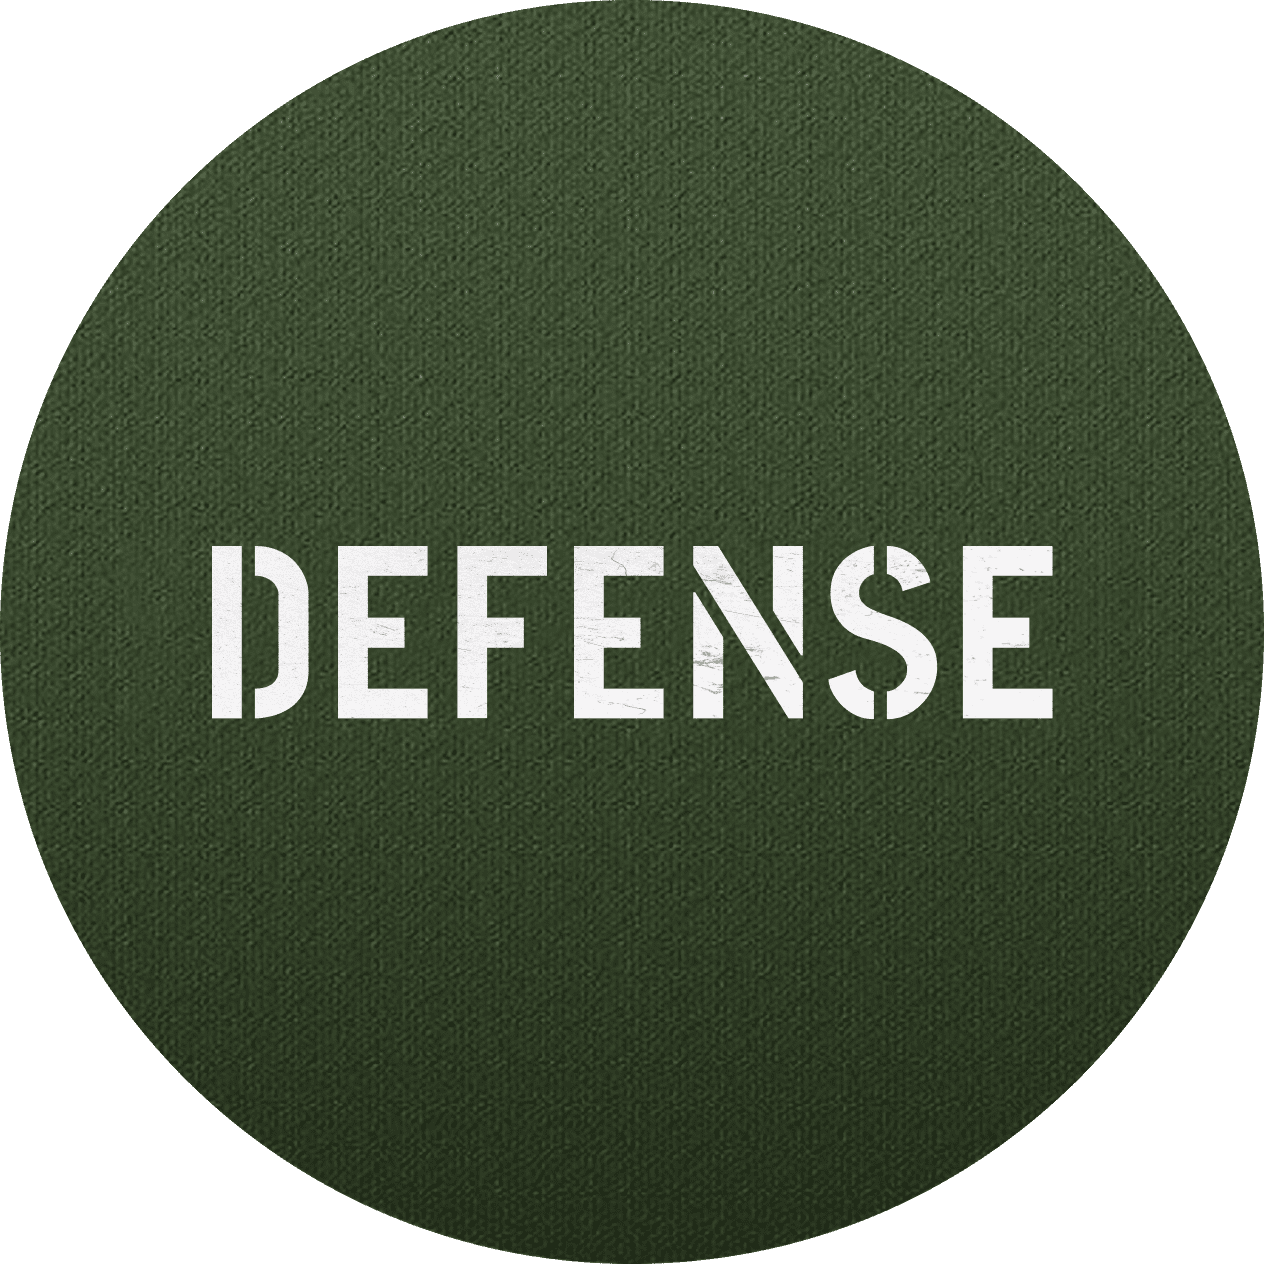   Banking products for Defense Tech customers